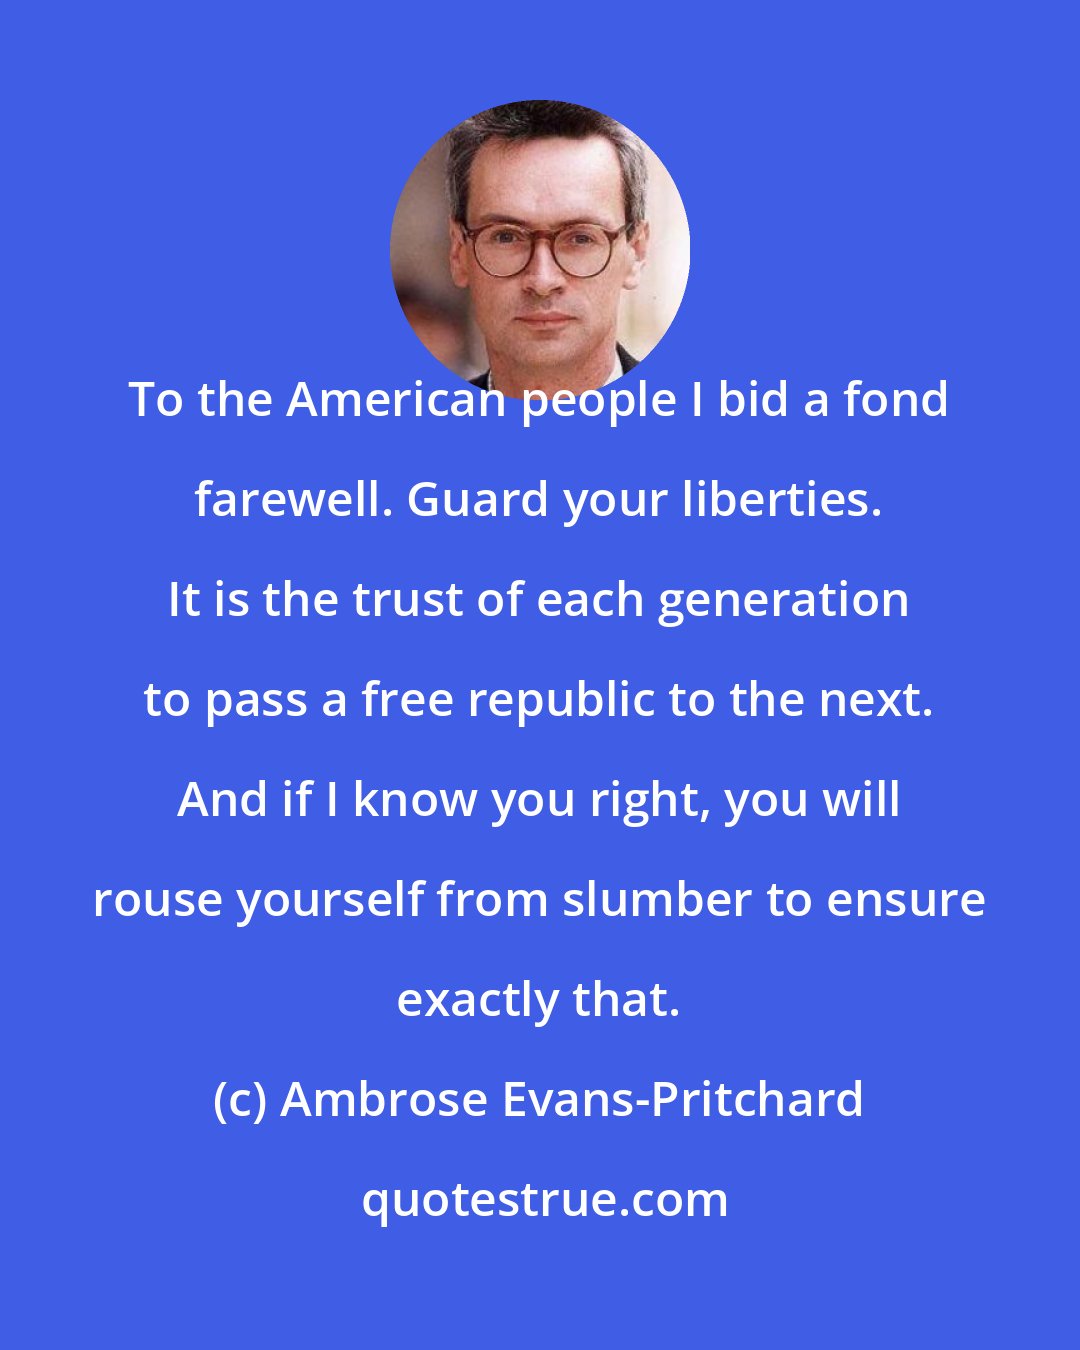 Ambrose Evans-Pritchard: To the American people I bid a fond farewell. Guard your liberties. It is the trust of each generation to pass a free republic to the next. And if I know you right, you will rouse yourself from slumber to ensure exactly that.